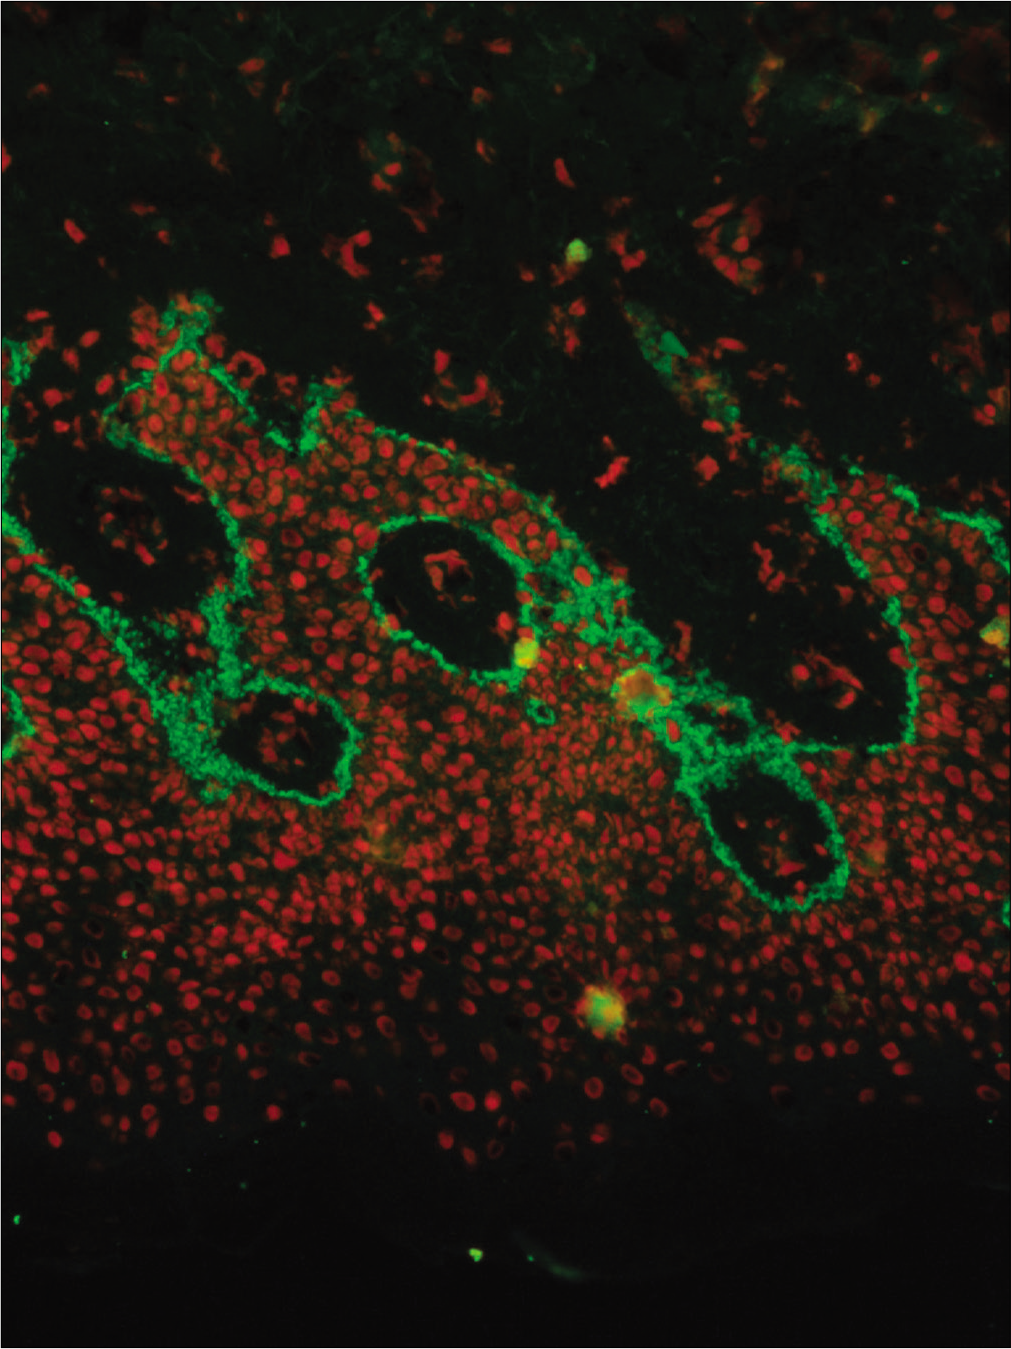 Direct immunofluorescence of a perilesional biopsy with strong linear staining of C3 at the dermal-epidermal junction in patient No 7 (fluorescein isothiocyanate, 400×)